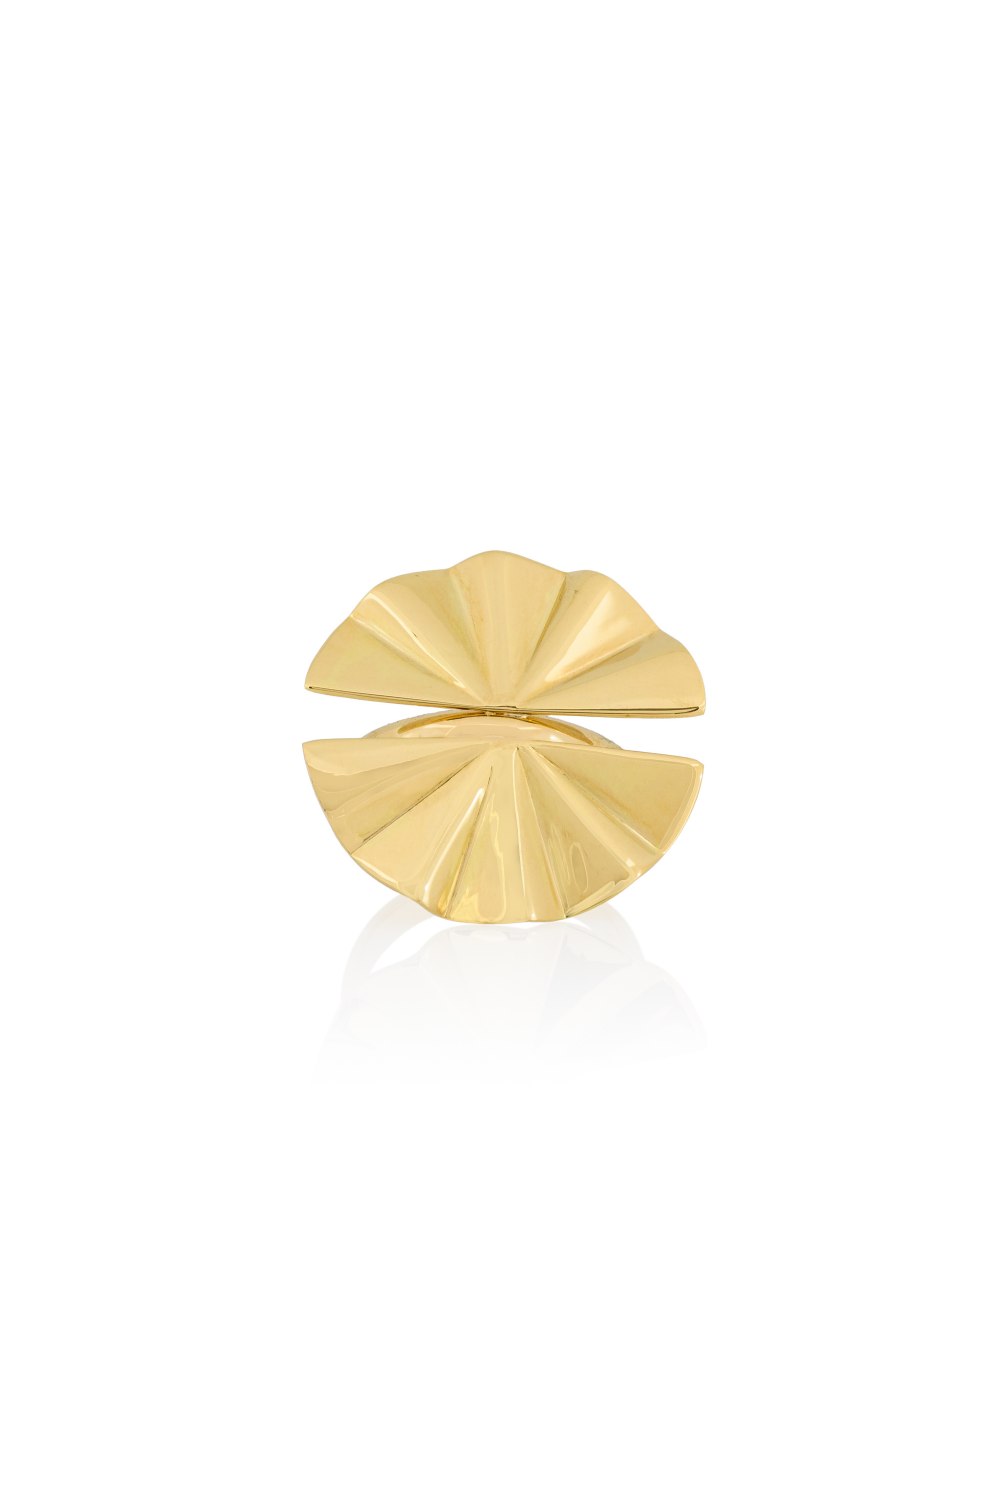 Double Goldie Geisha Yellow Gold Ring